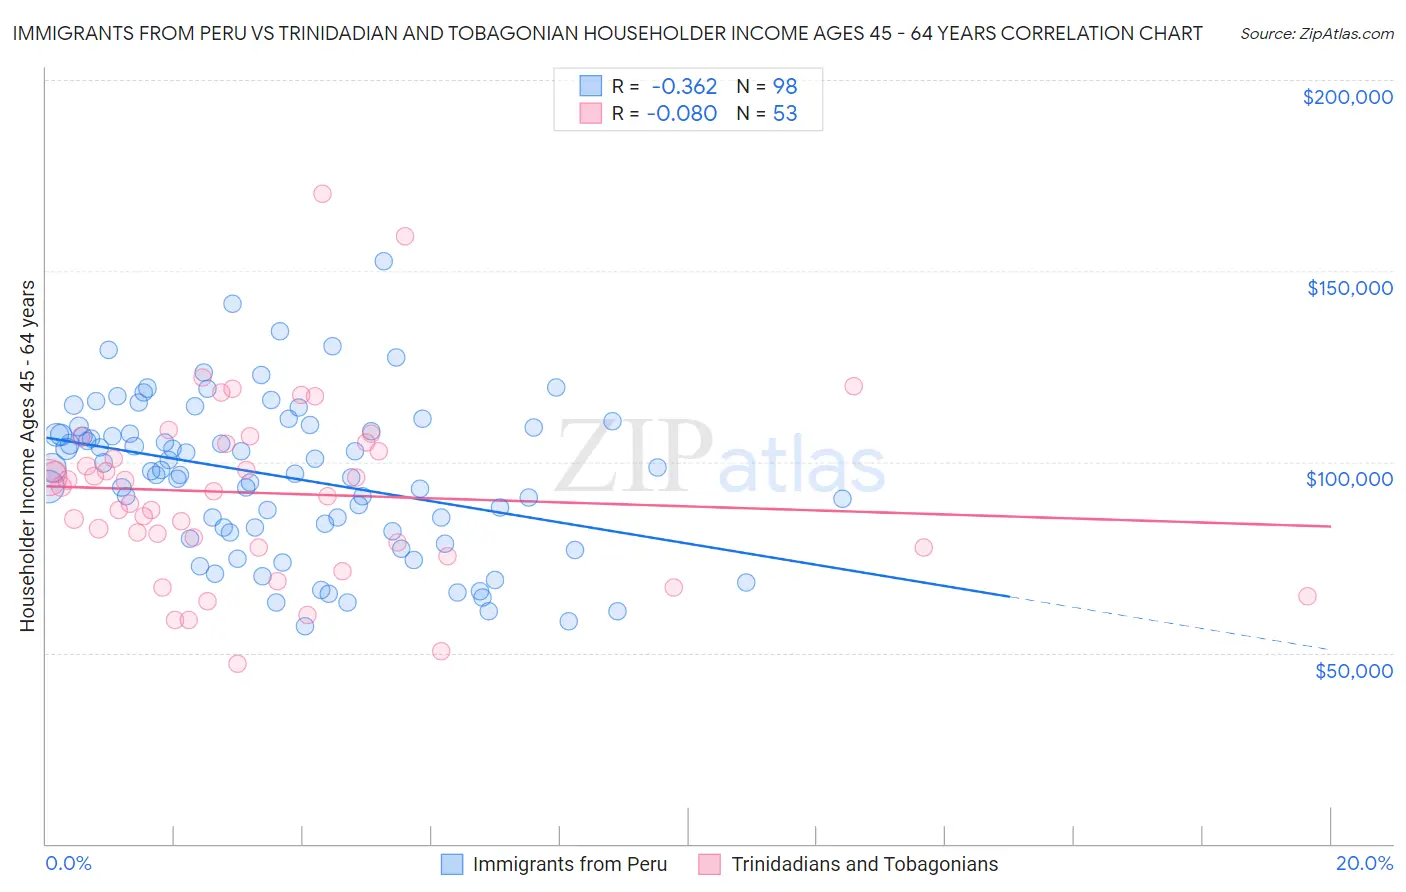 Immigrants from Peru vs Trinidadian and Tobagonian Householder Income Ages 45 - 64 years